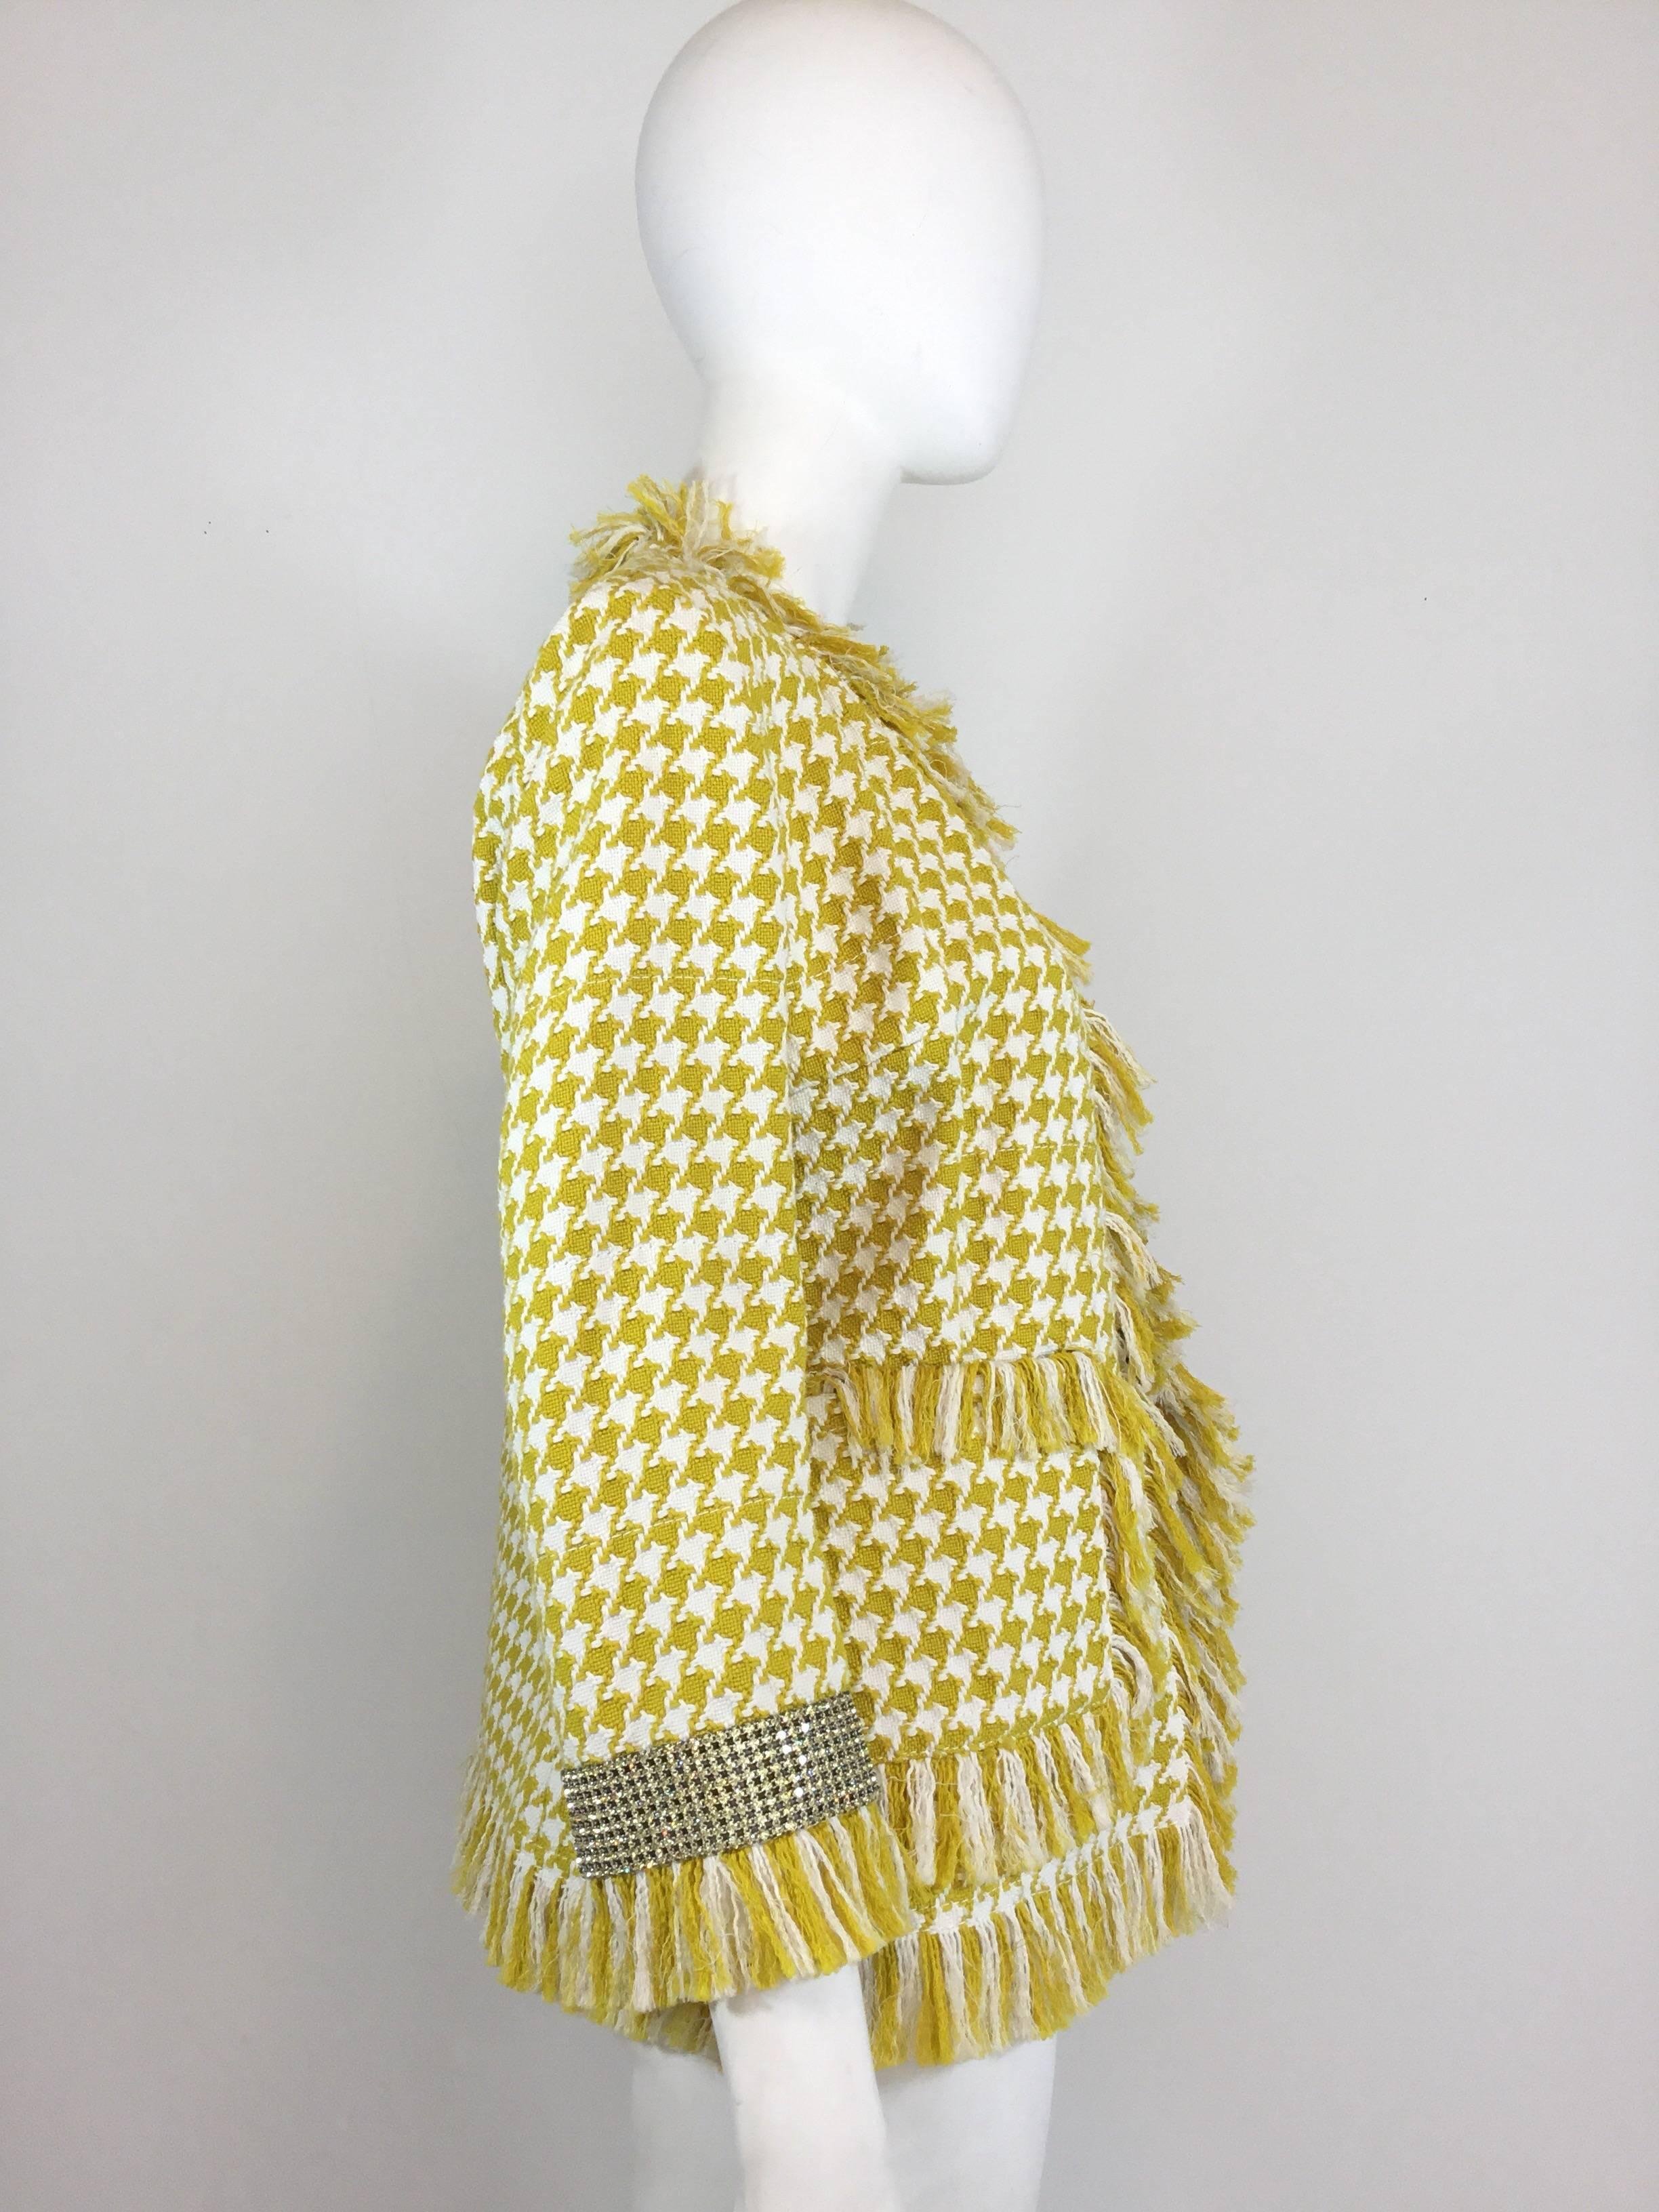 Yellow and white houndstooth Dolce & Gabbana jacket features a houndstooth knit pattern throughout, fringed trimming, and crystal cuffs. Lined in leopard print silk chiffon. Jacket has hook-and-eye clsoures, full silk leopard print lining. Labeled